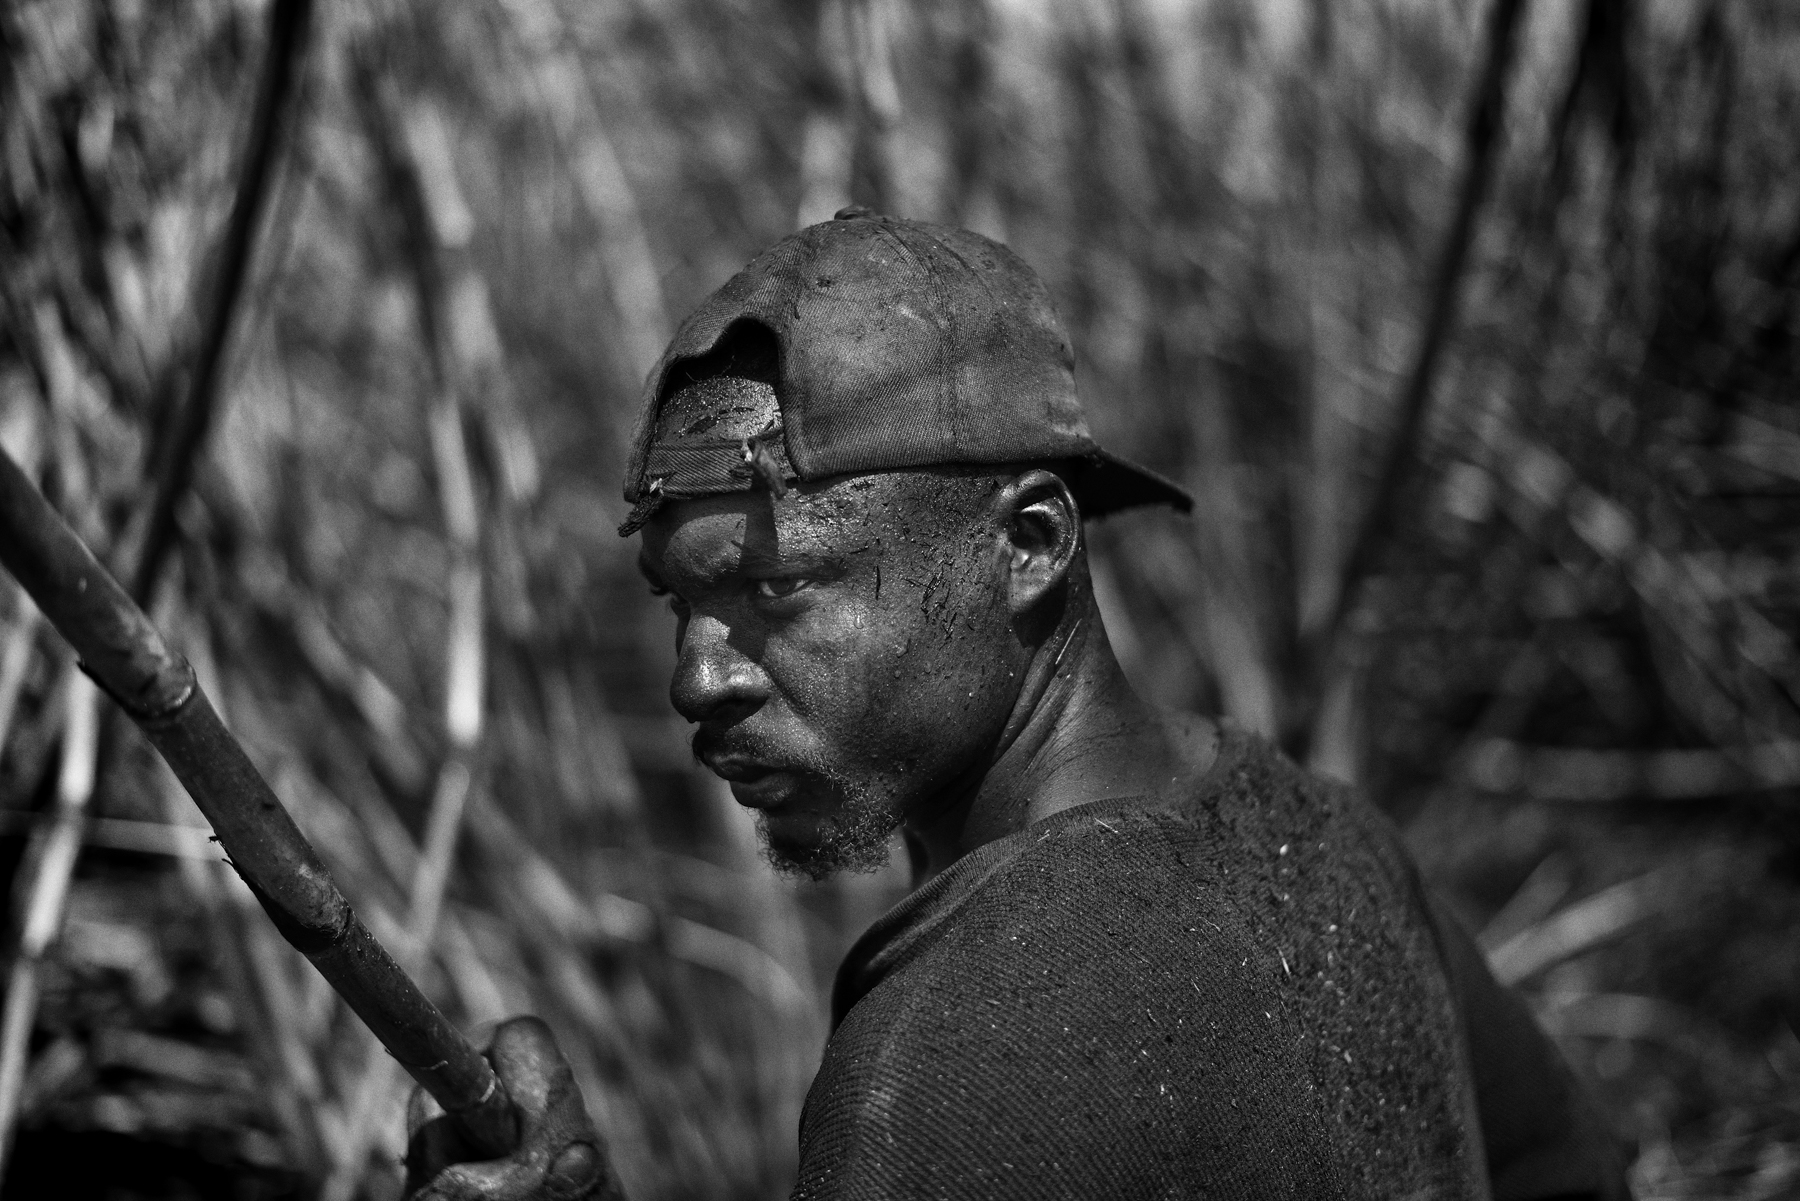 Modern Day slavery, sugarcane in the Dominican Republic